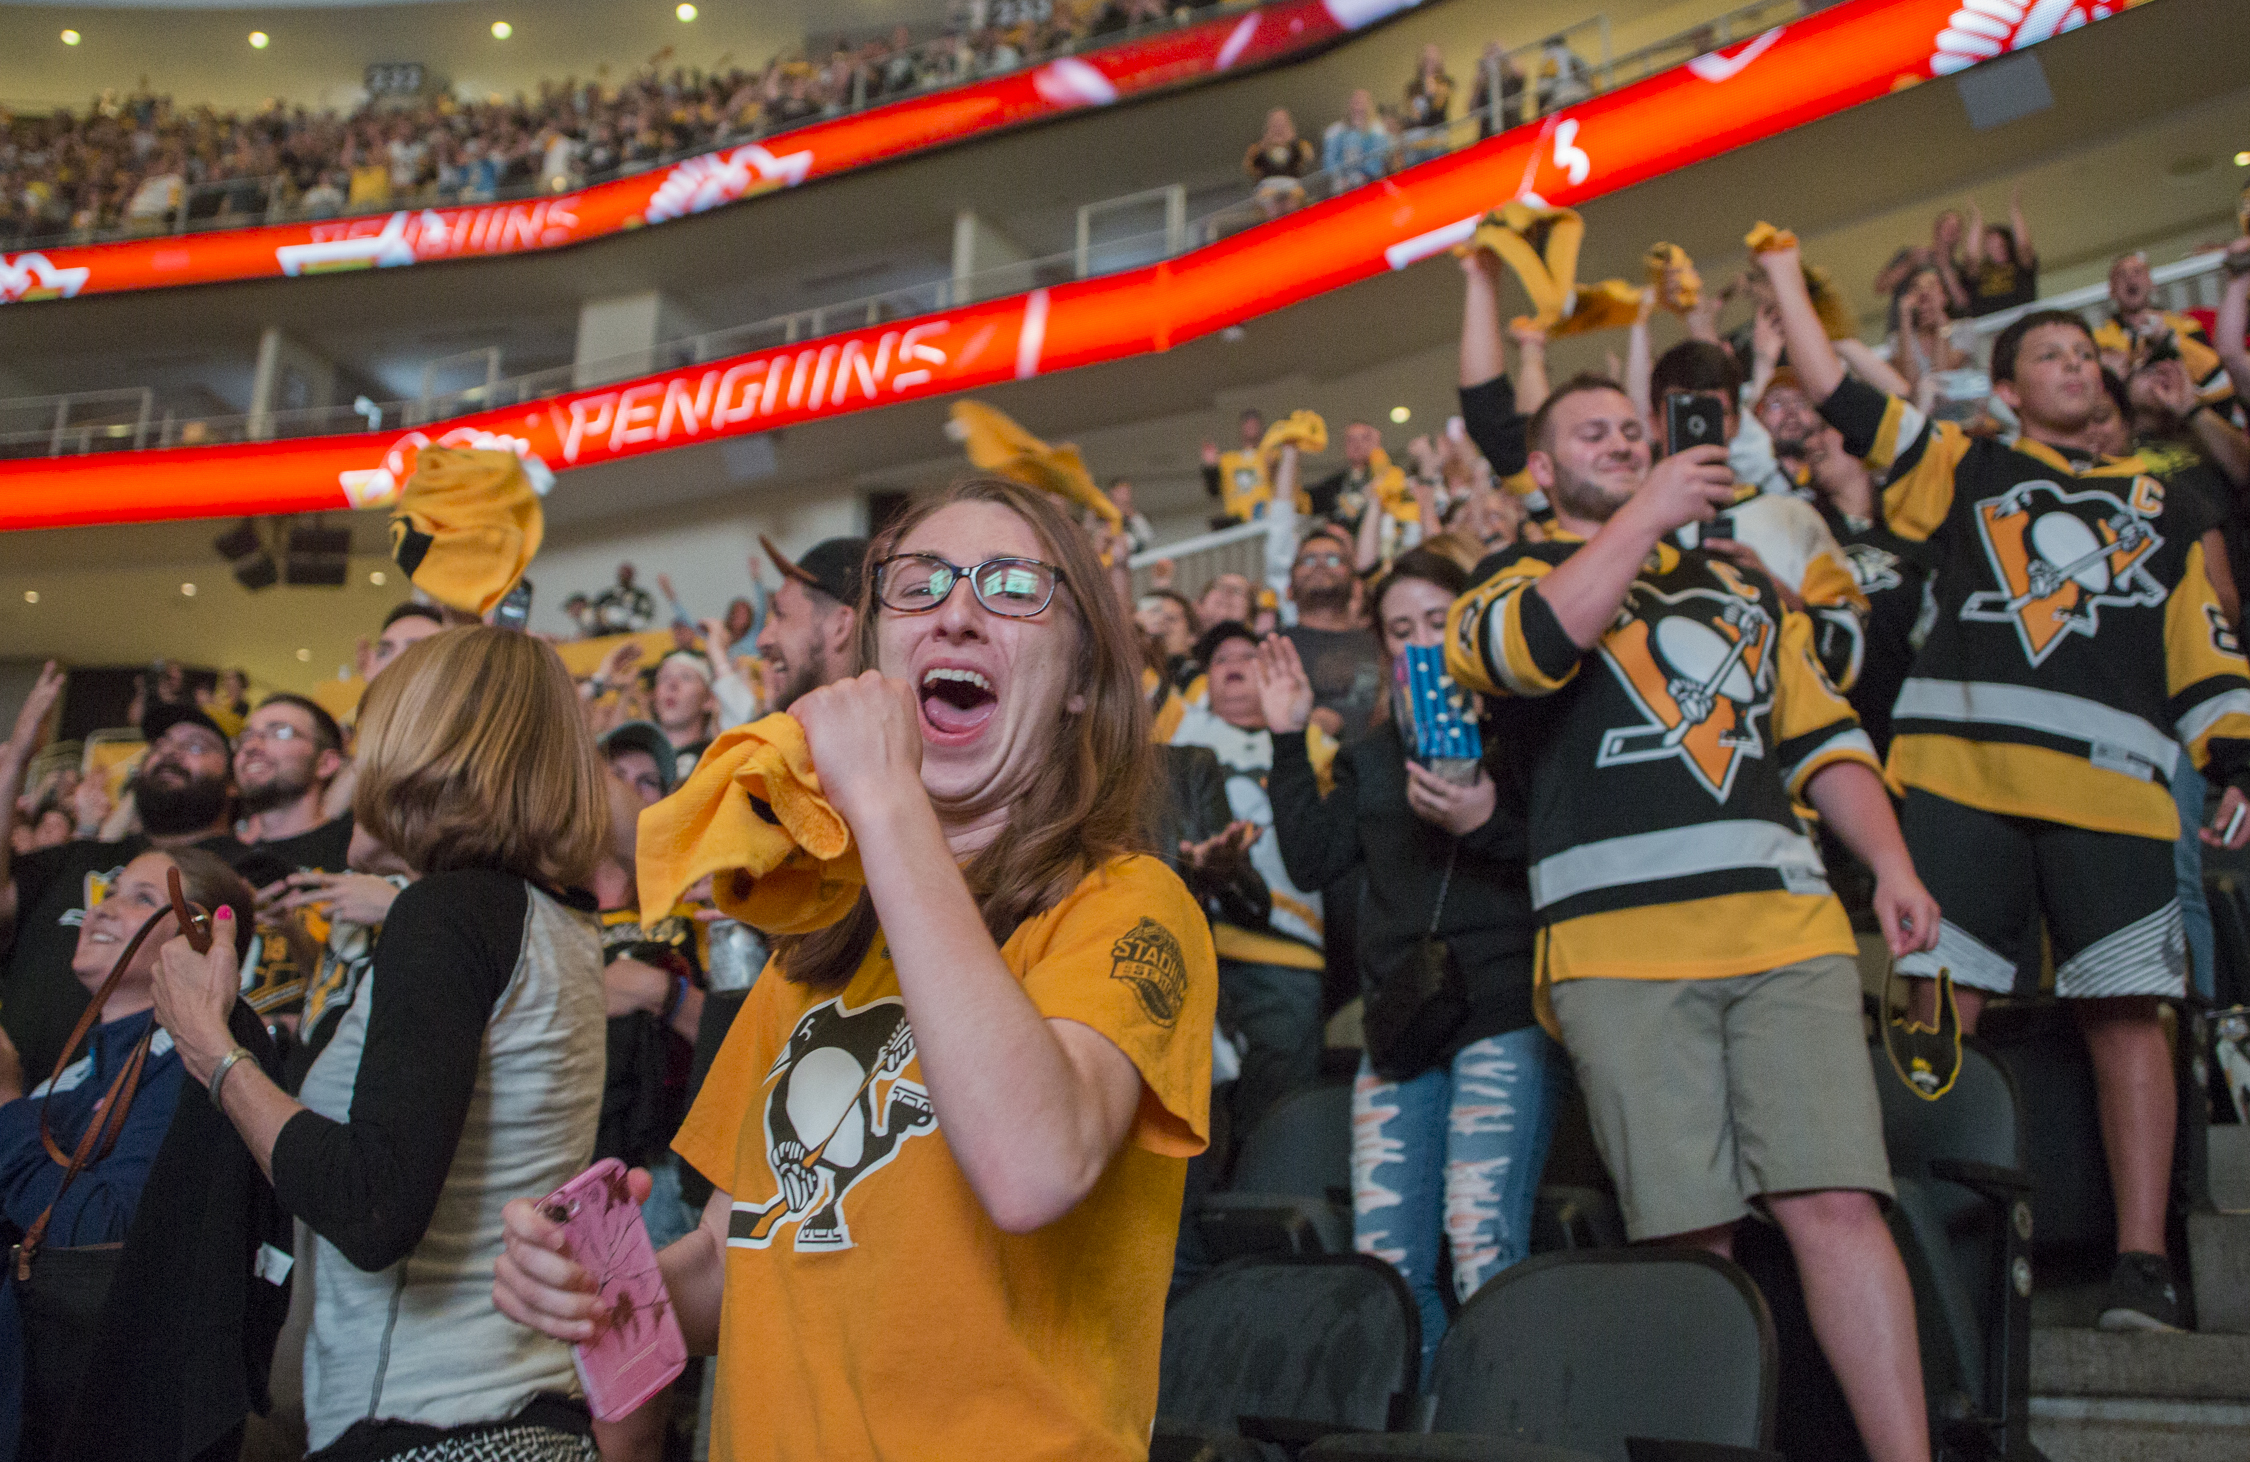  Erin Burke, of Ohio Township, Pa., cheers as the Penguins score their first goal in the third period of the sixth game of the Stanley Cup Championship during a watch party in PPG Paints Arena in Pittsburgh, Pa. on June 11, 2017. The Penguins won the